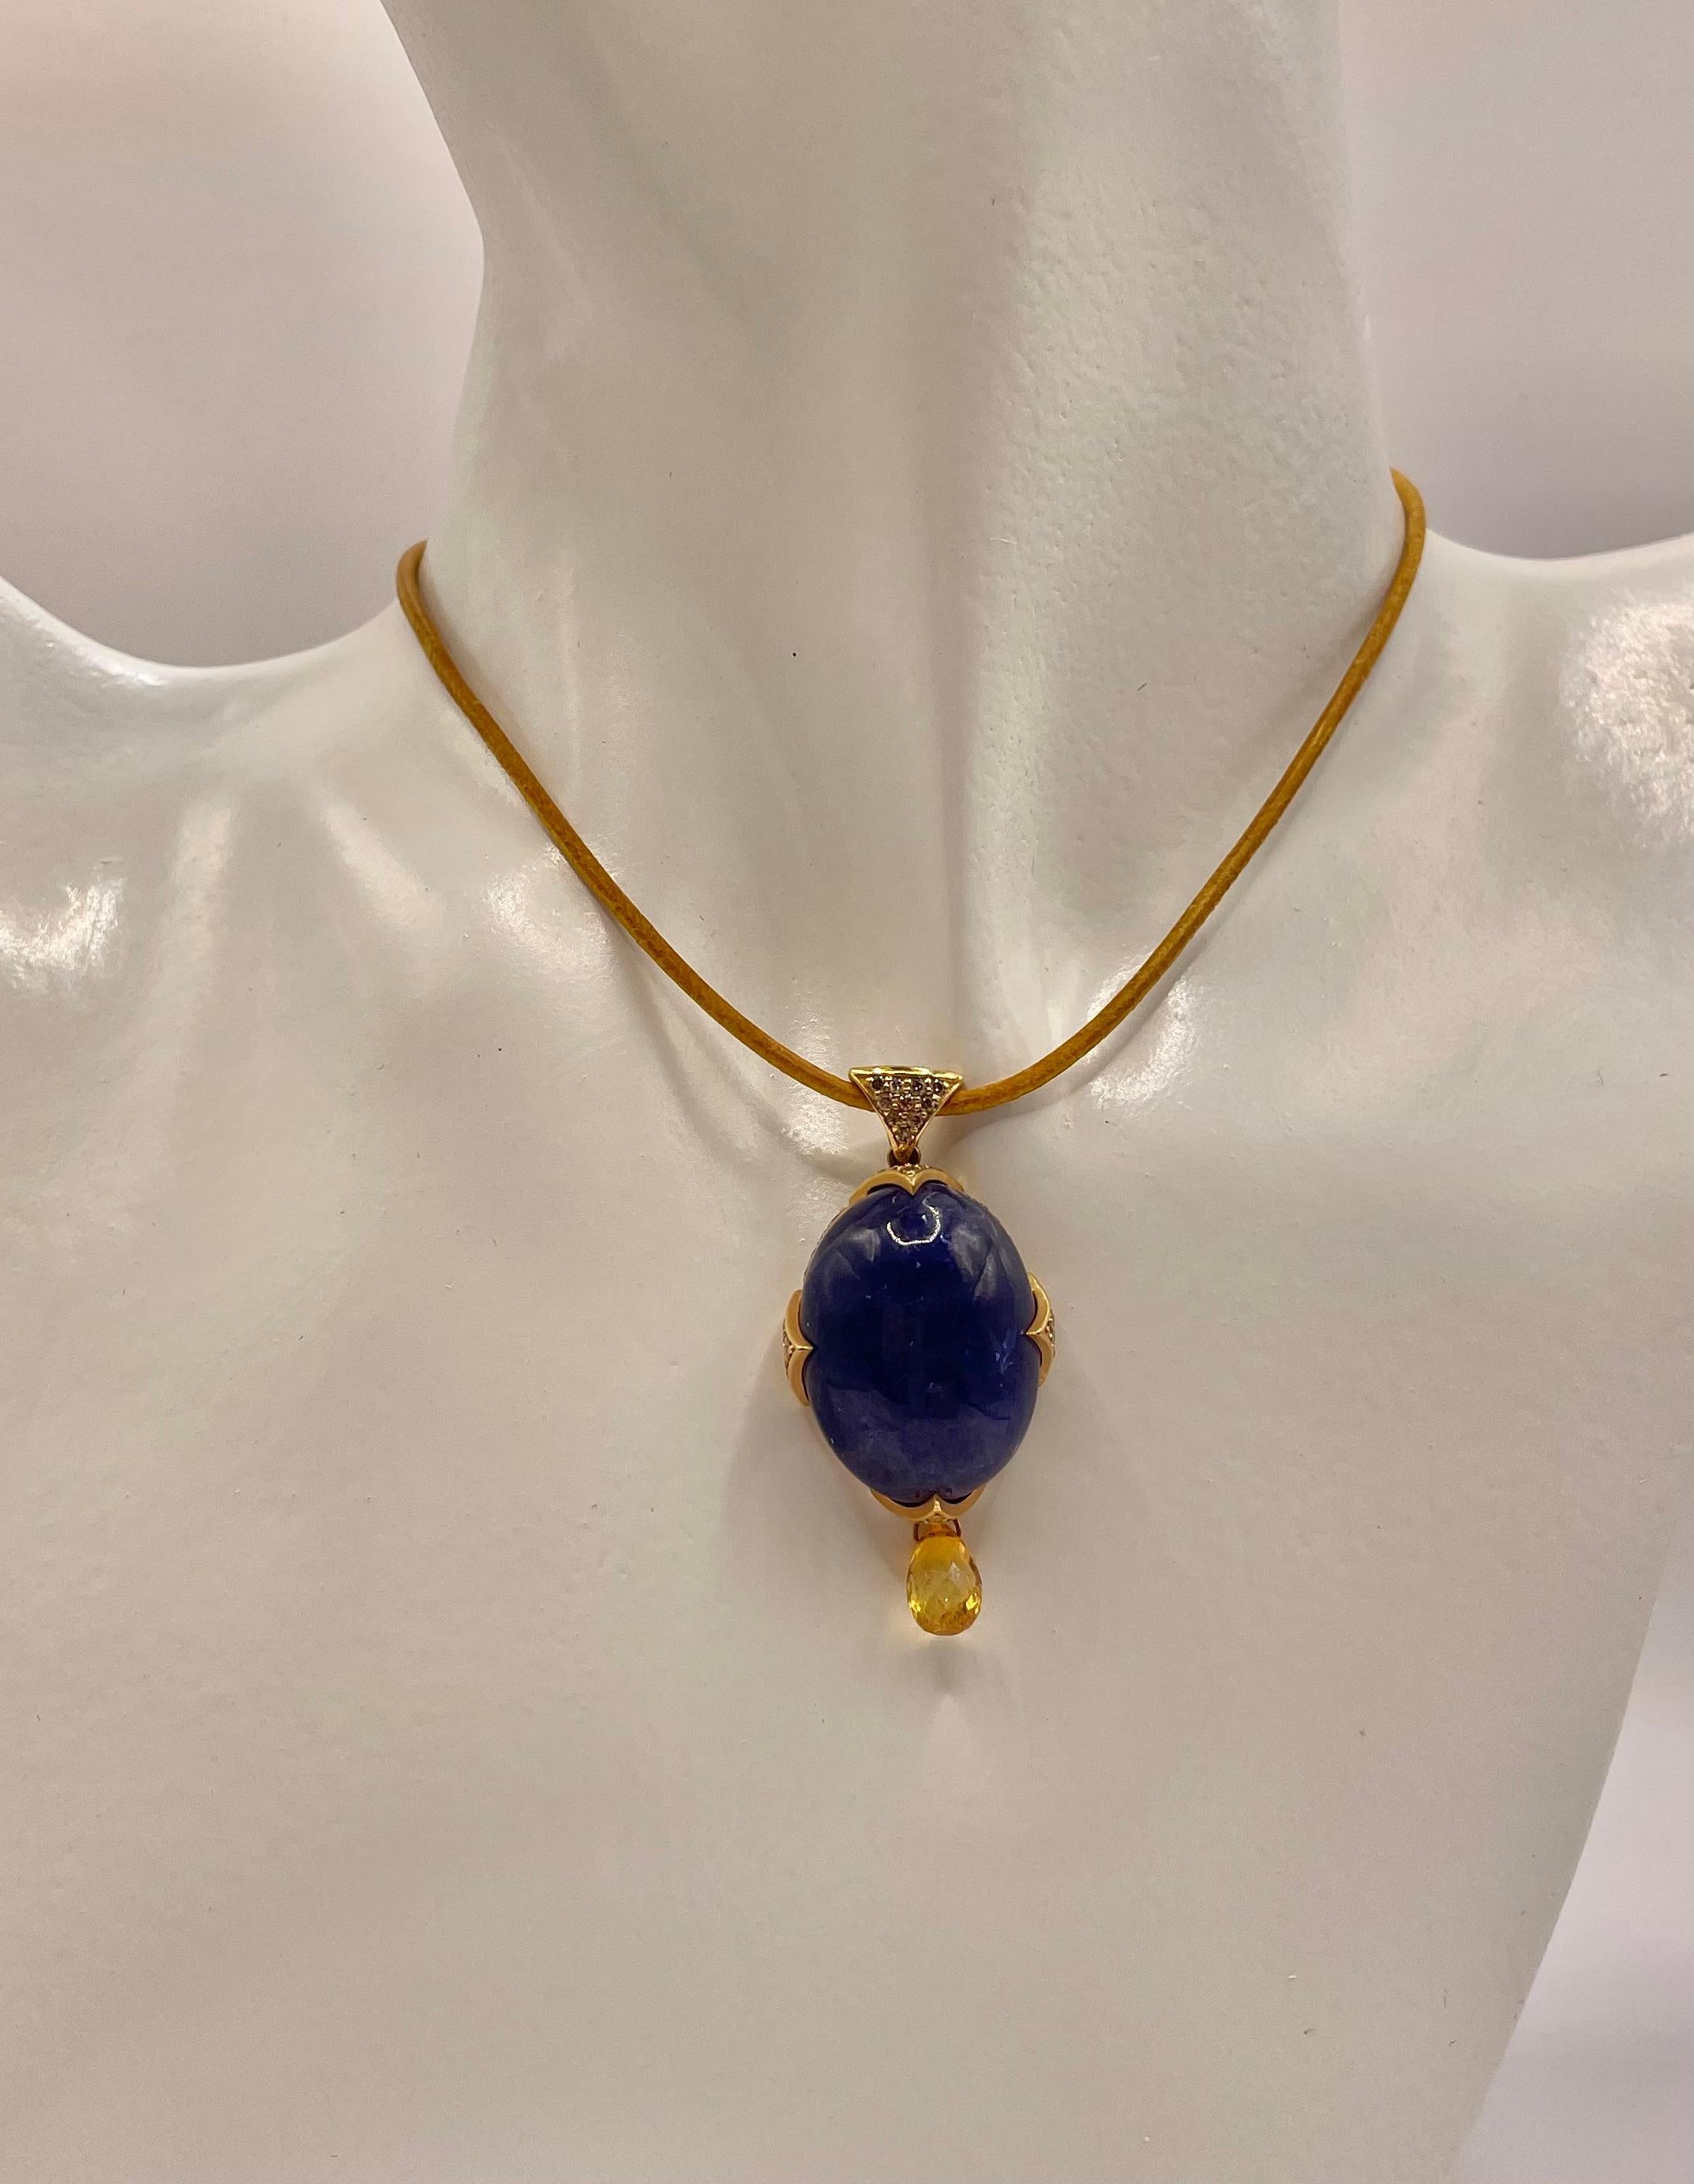 One of a kind ! 28 ct cabochon Tanzanite and 0.7 ct yellow sapphire briolette  set in 18k gold with 0.69 ct champagne diamonds.On yellow Italian leather cord that  can be tie at the back .